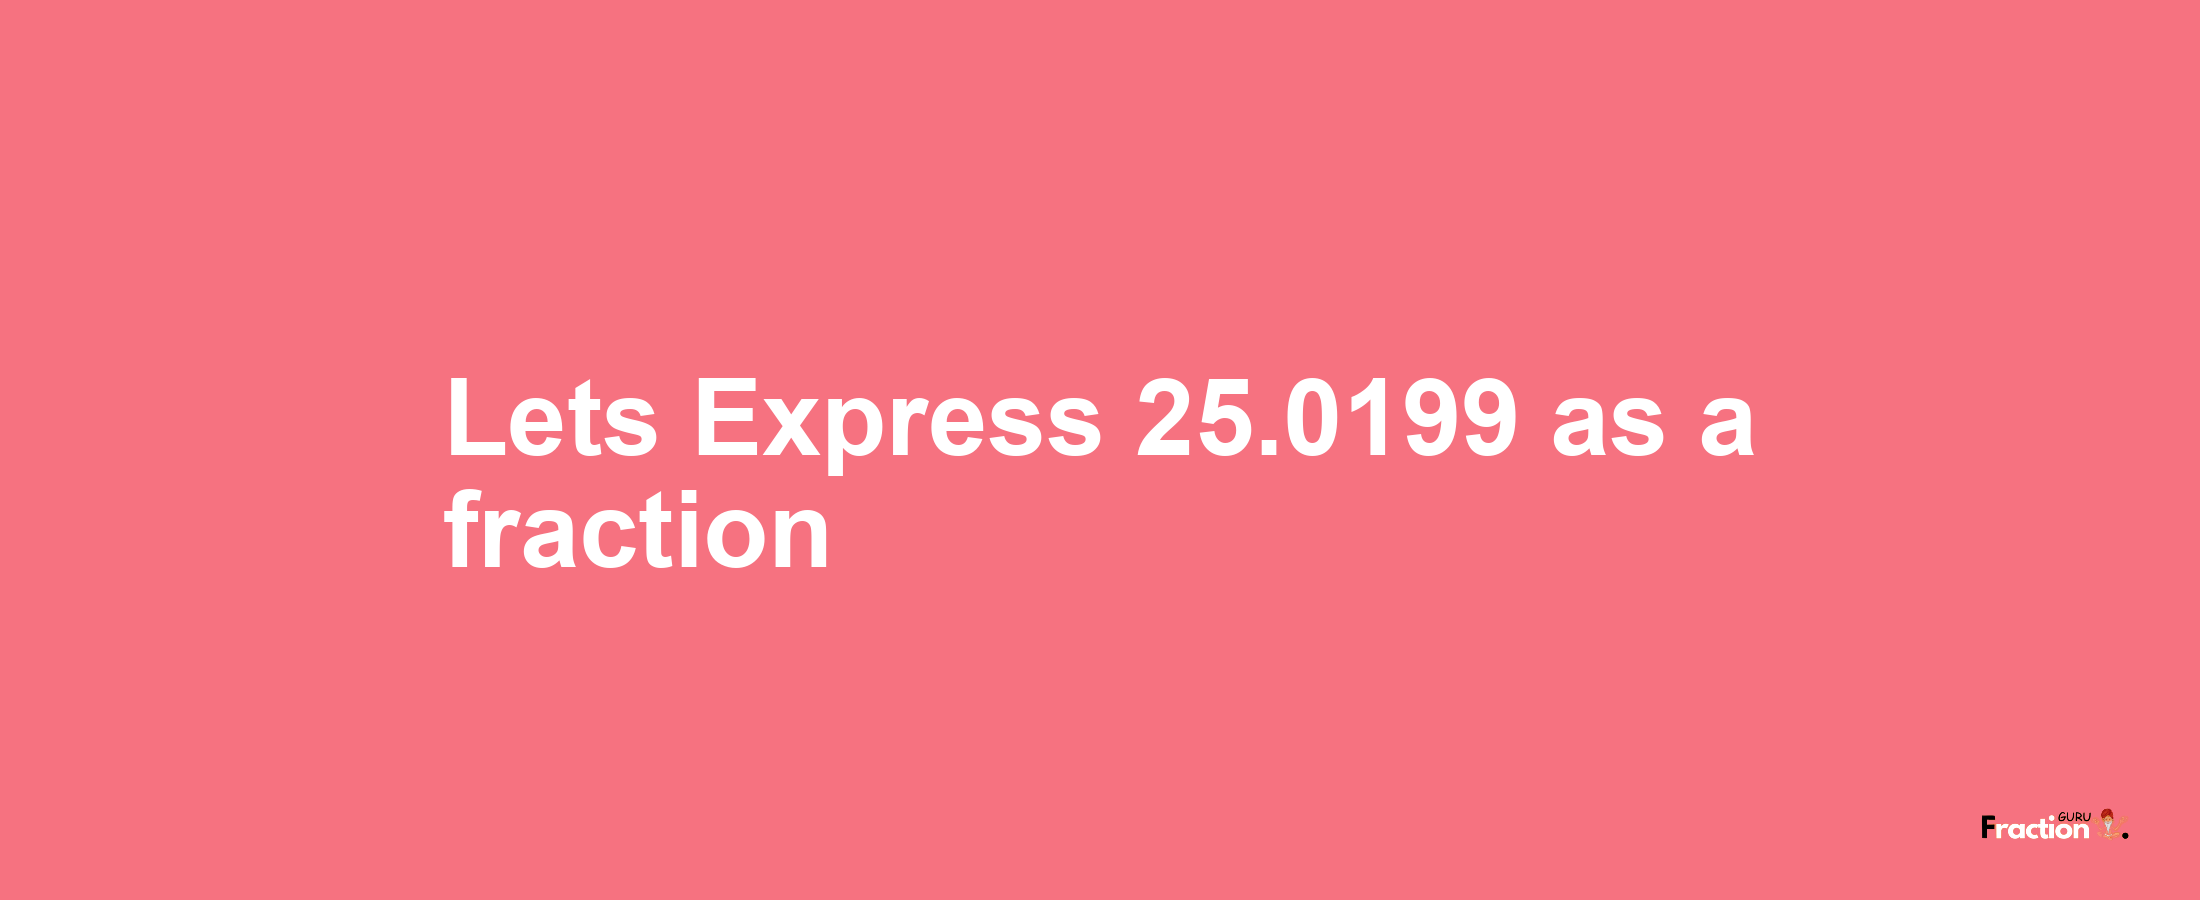 Lets Express 25.0199 as afraction